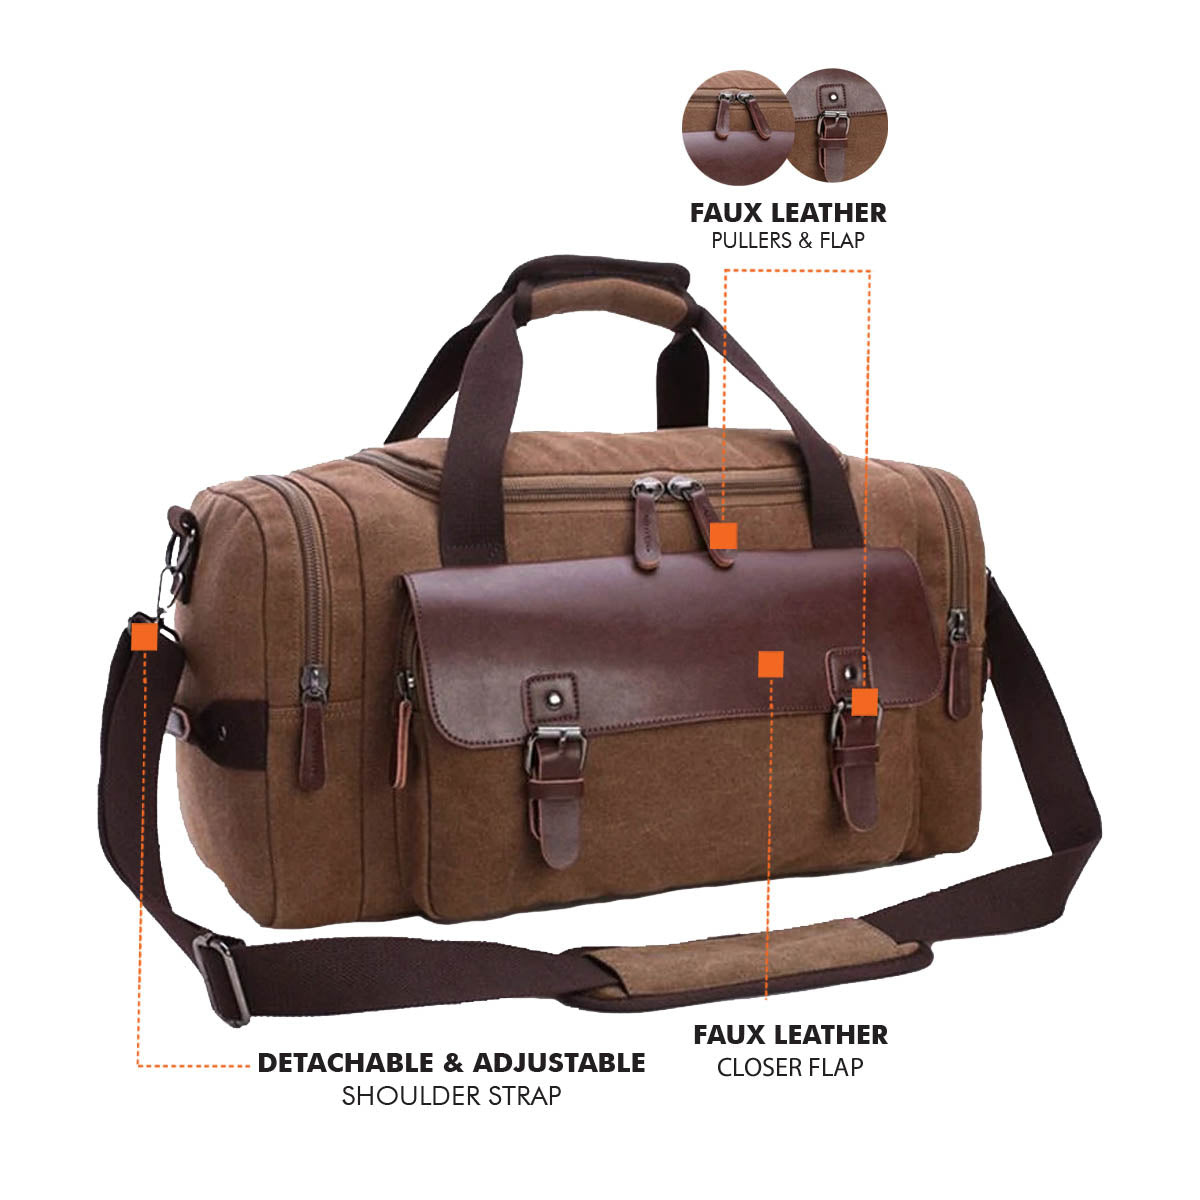 Solid Leather And Canvas Duffle Bag For men For Travel